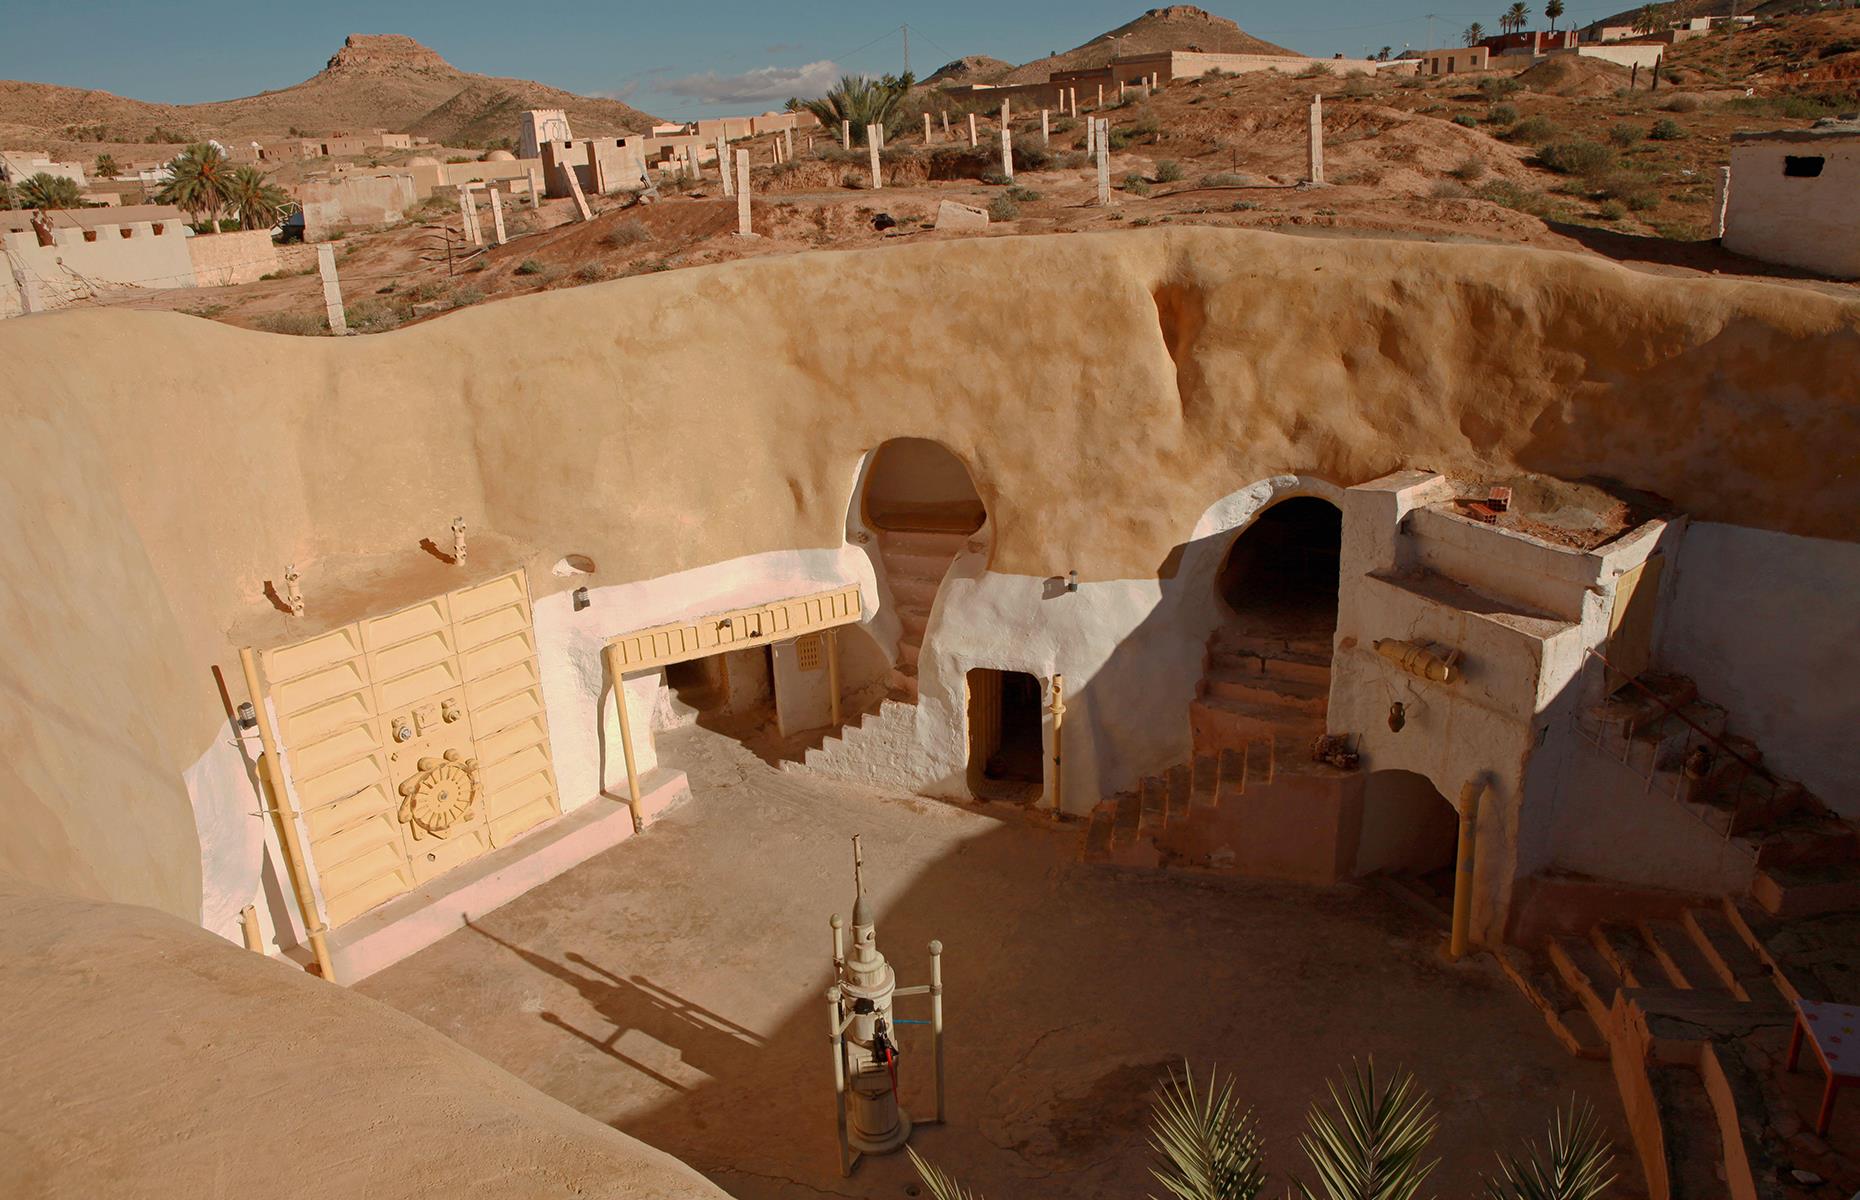 <p>Fans of the <em>Star Wars</em> franchise will appreciate this outpost in central Tunisia. Featured in <em>A New Hope</em> (the first <em>Star Wars</em> film ever released) and again in <em>Attack of the Clones</em>, the hotel doubles as the childhood home of Luke Skywalker on the planet of Tatooine. The hotel itself is an excellent example of traditional Berber architecture and features plenty of nods to the famous franchise, including original frescoes and decorations harking back to its time as a film set.</p>